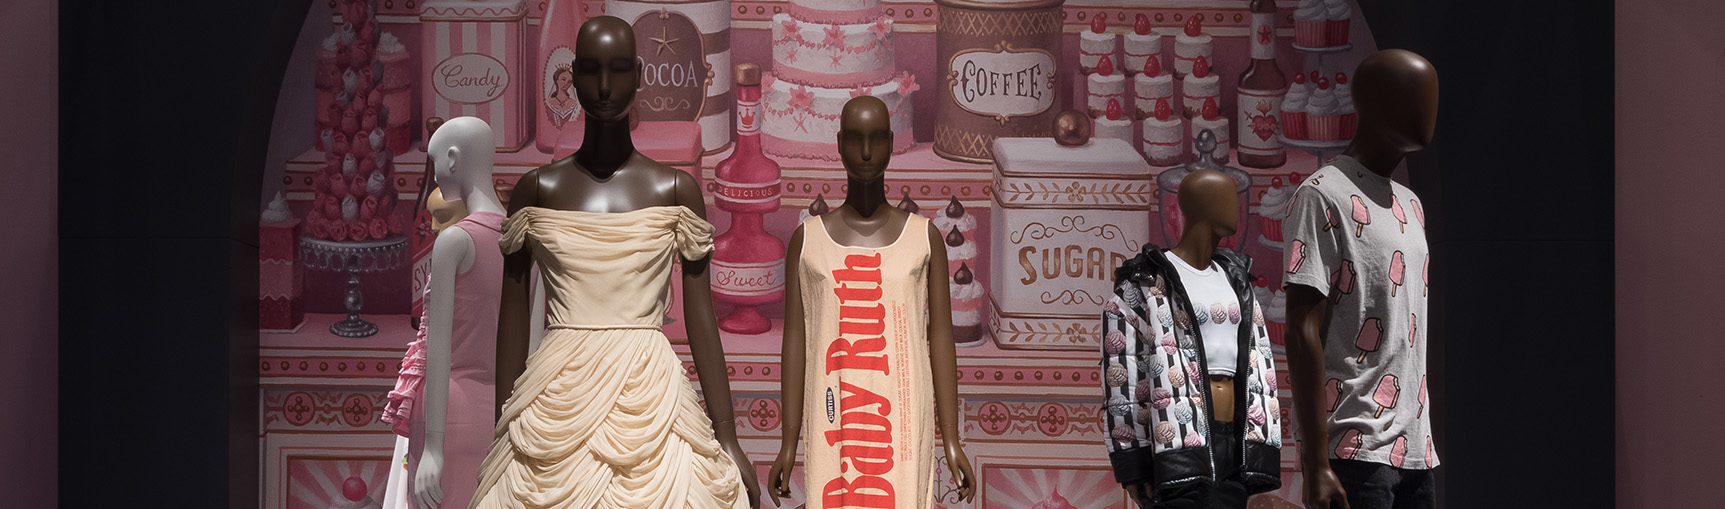 sugar, spice, and everything nice? section of food and fashion